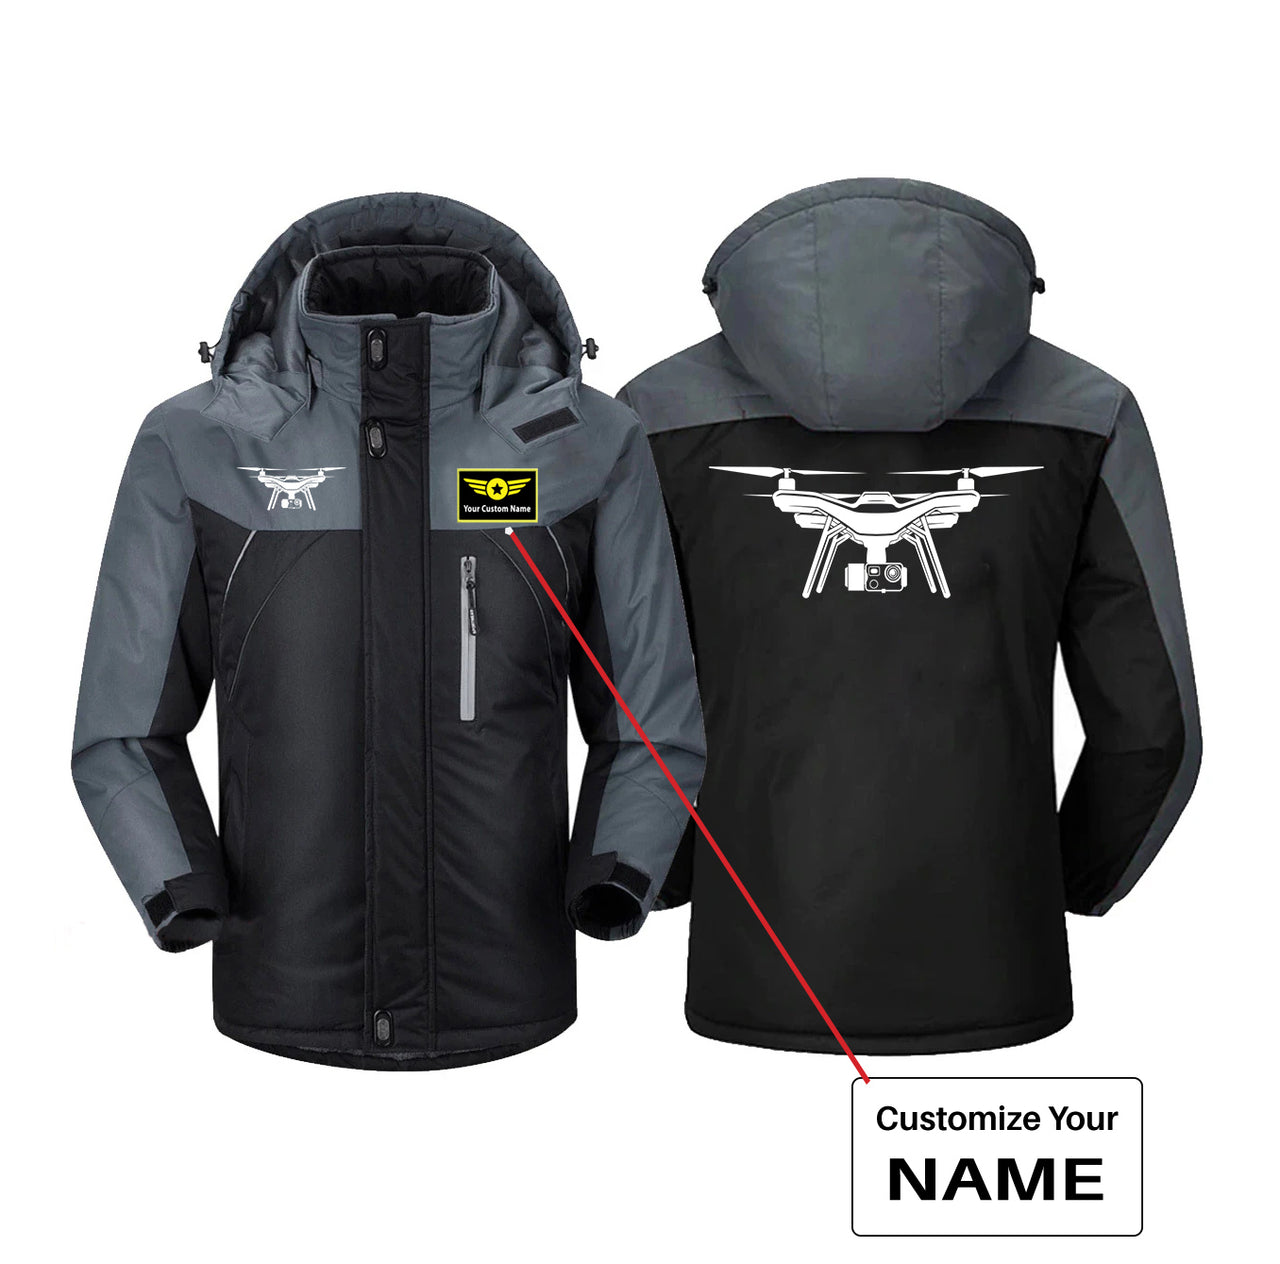 Drone Silhouette Designed Thick Winter Jackets